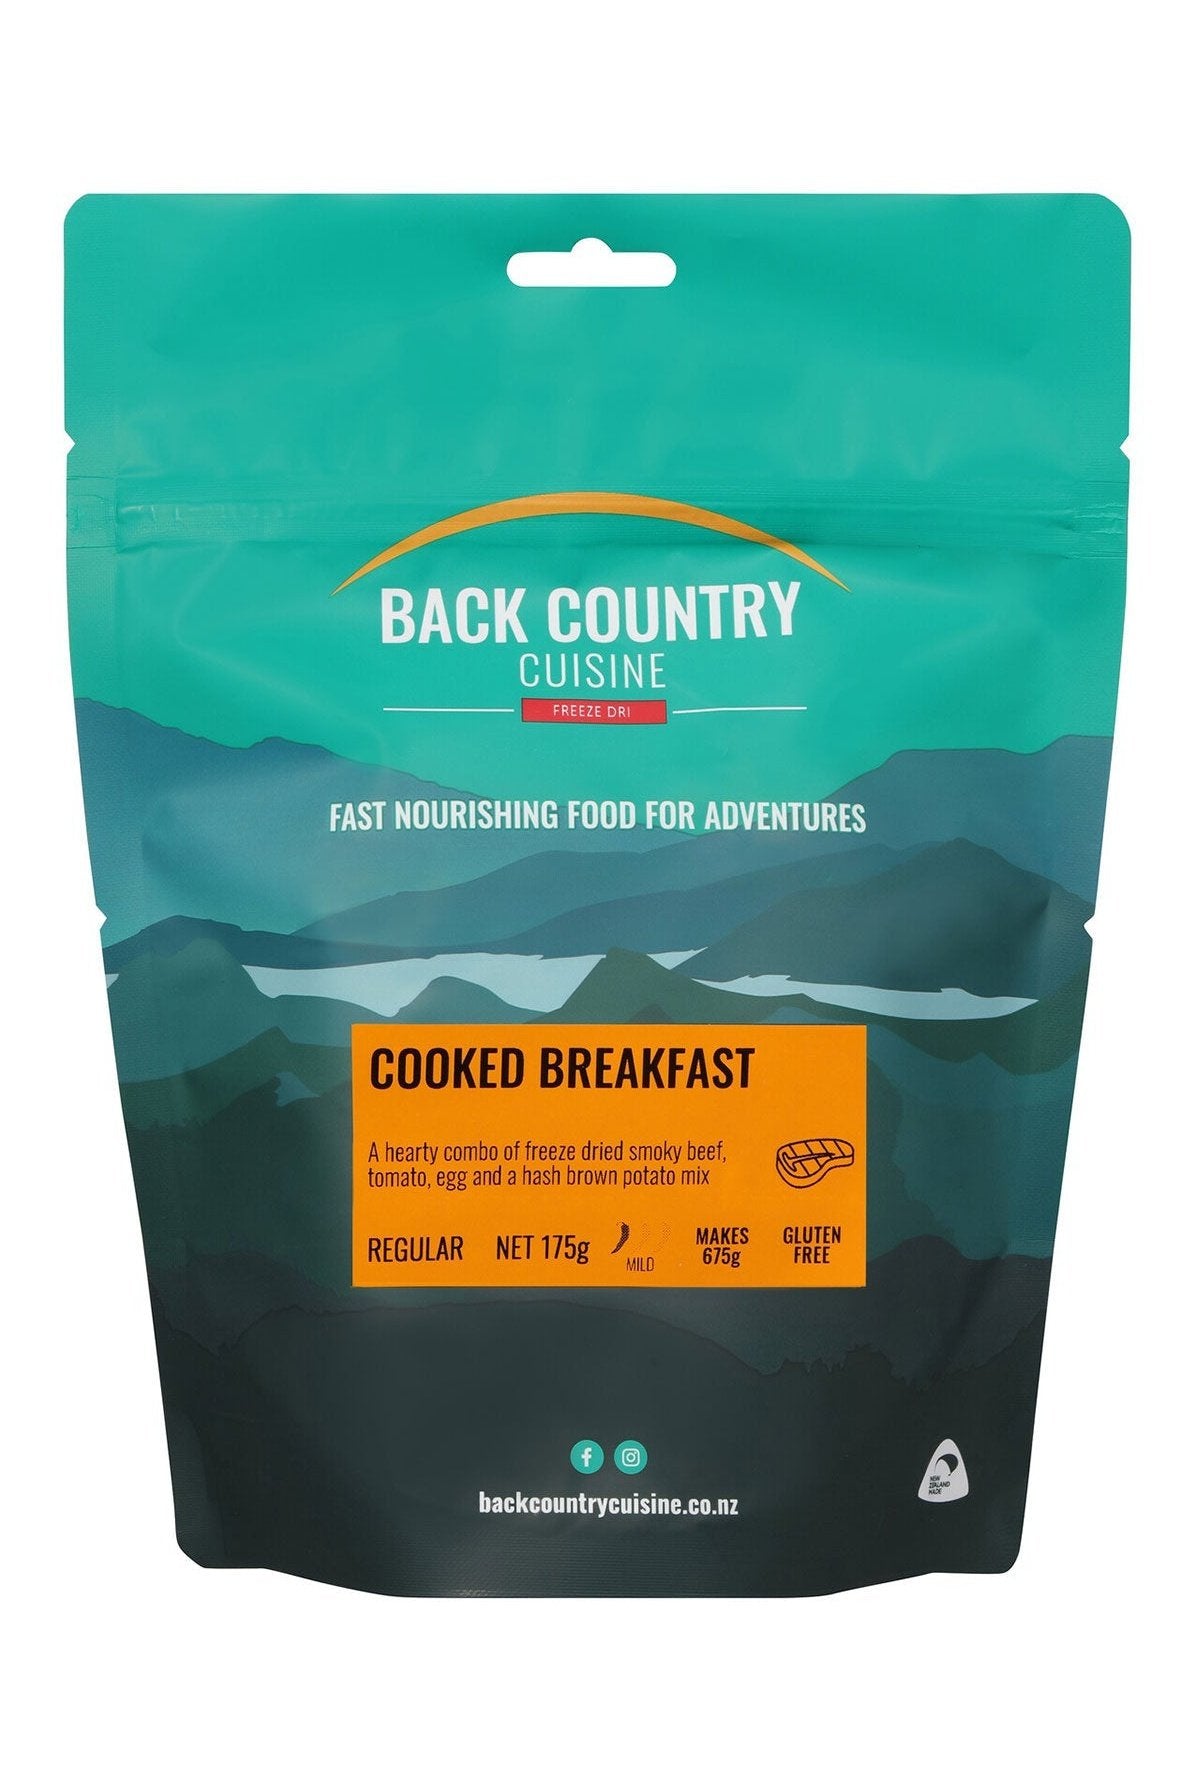 Back Country Cuisine - Cooked Breakfast Back Country Cuisine Rugged Ram Outdoors